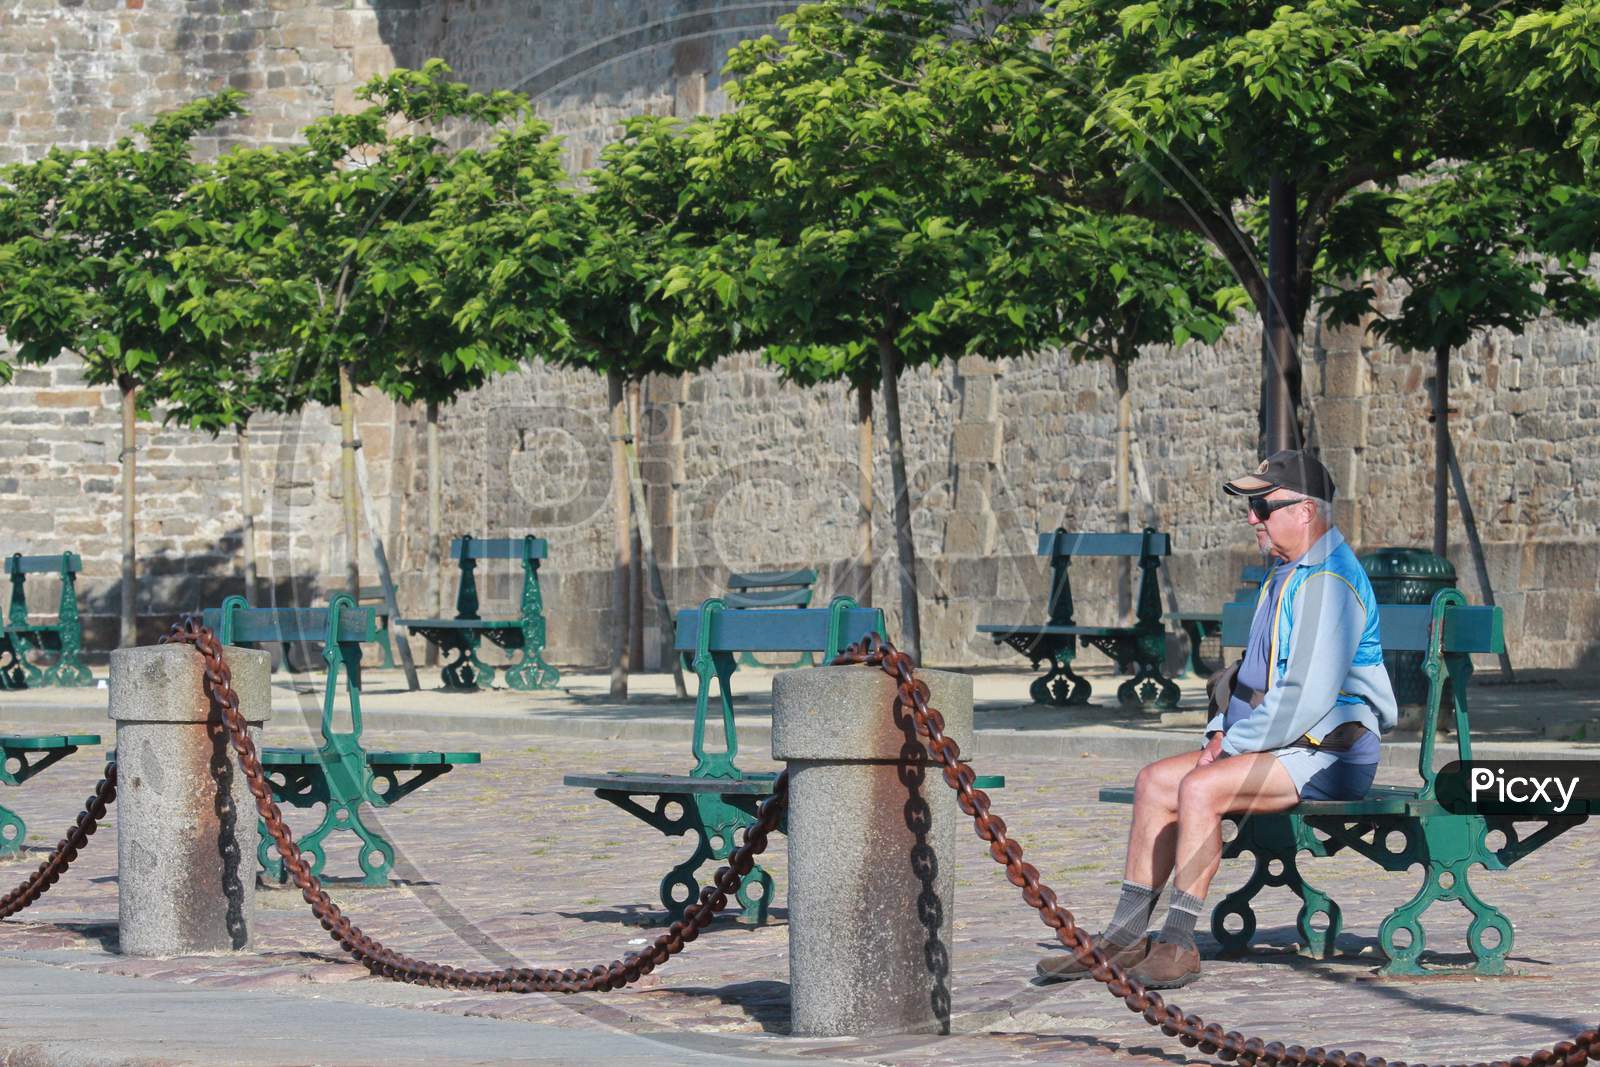 A Man sitting on the bench